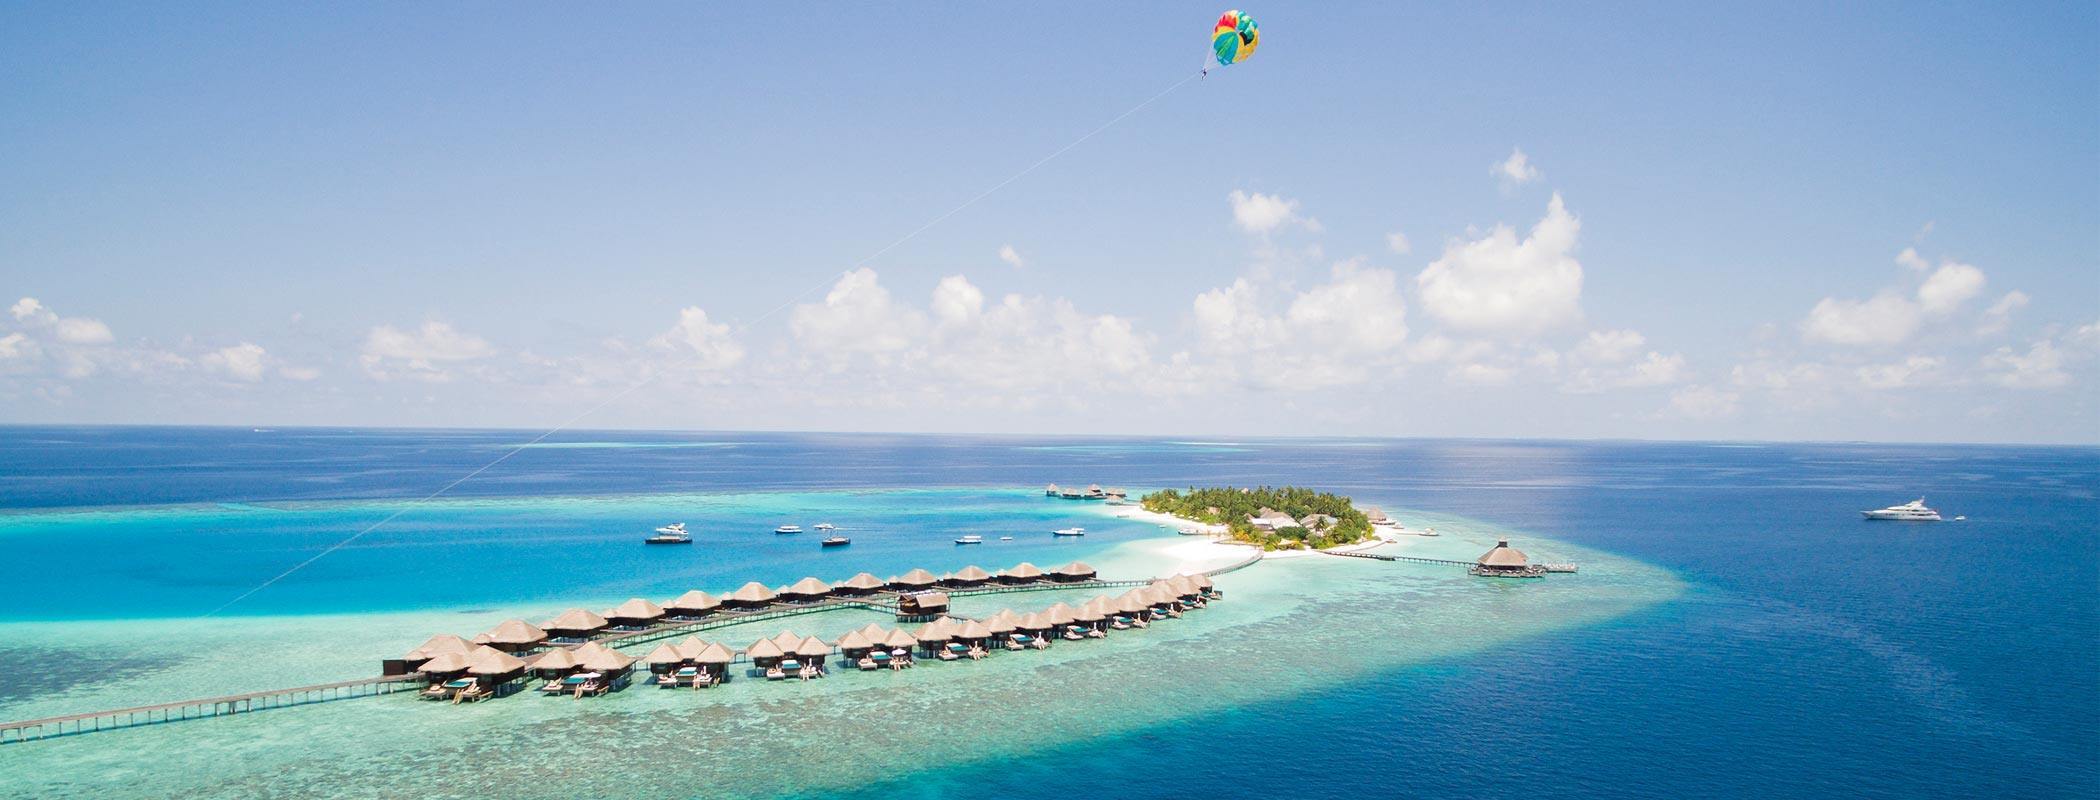 maldives luxury resorts, things to do in maldives